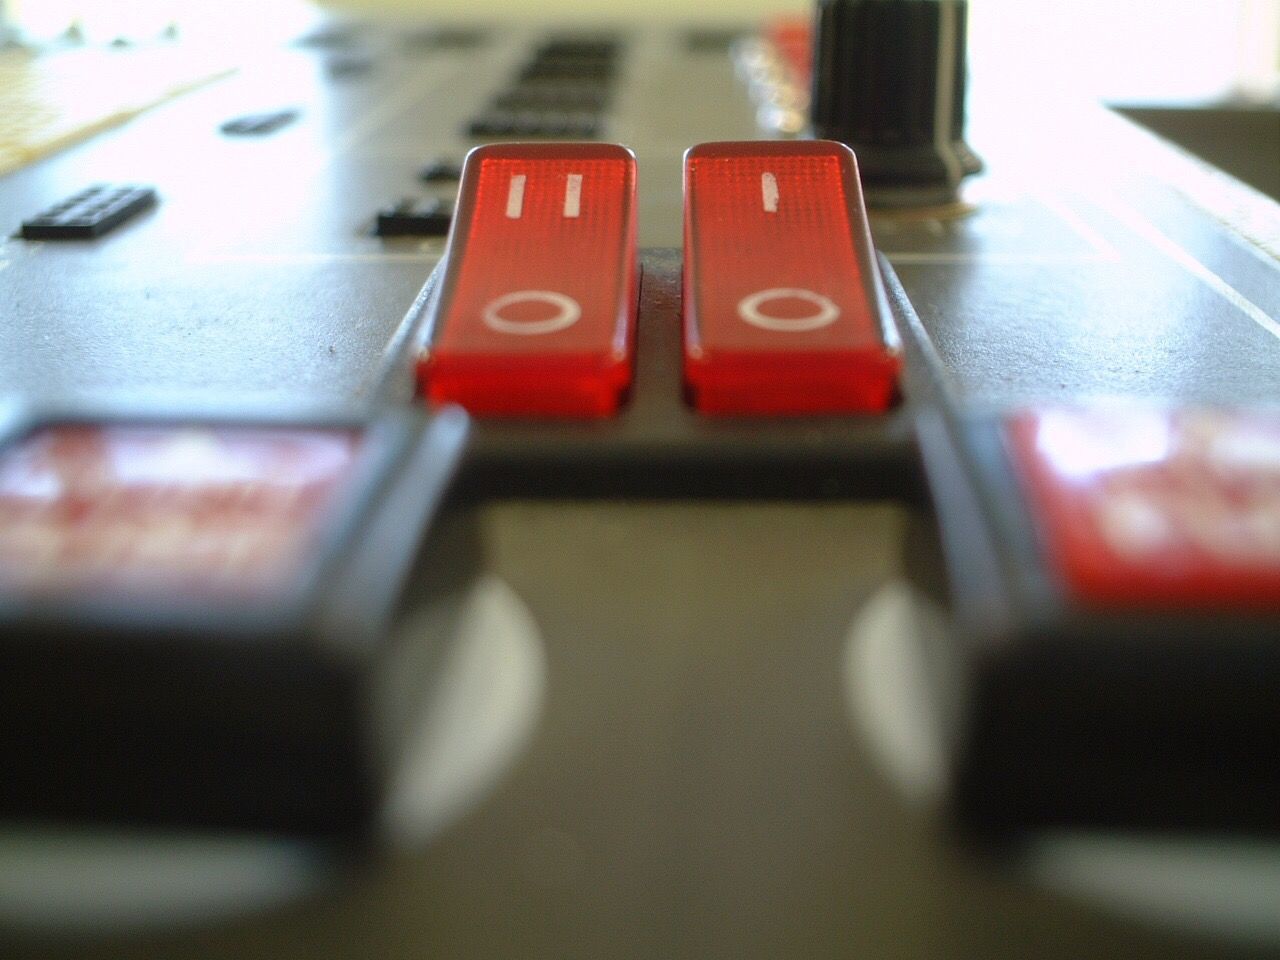 CLOSE-UP OF COMPUTER KEYBOARD ON FLOOR